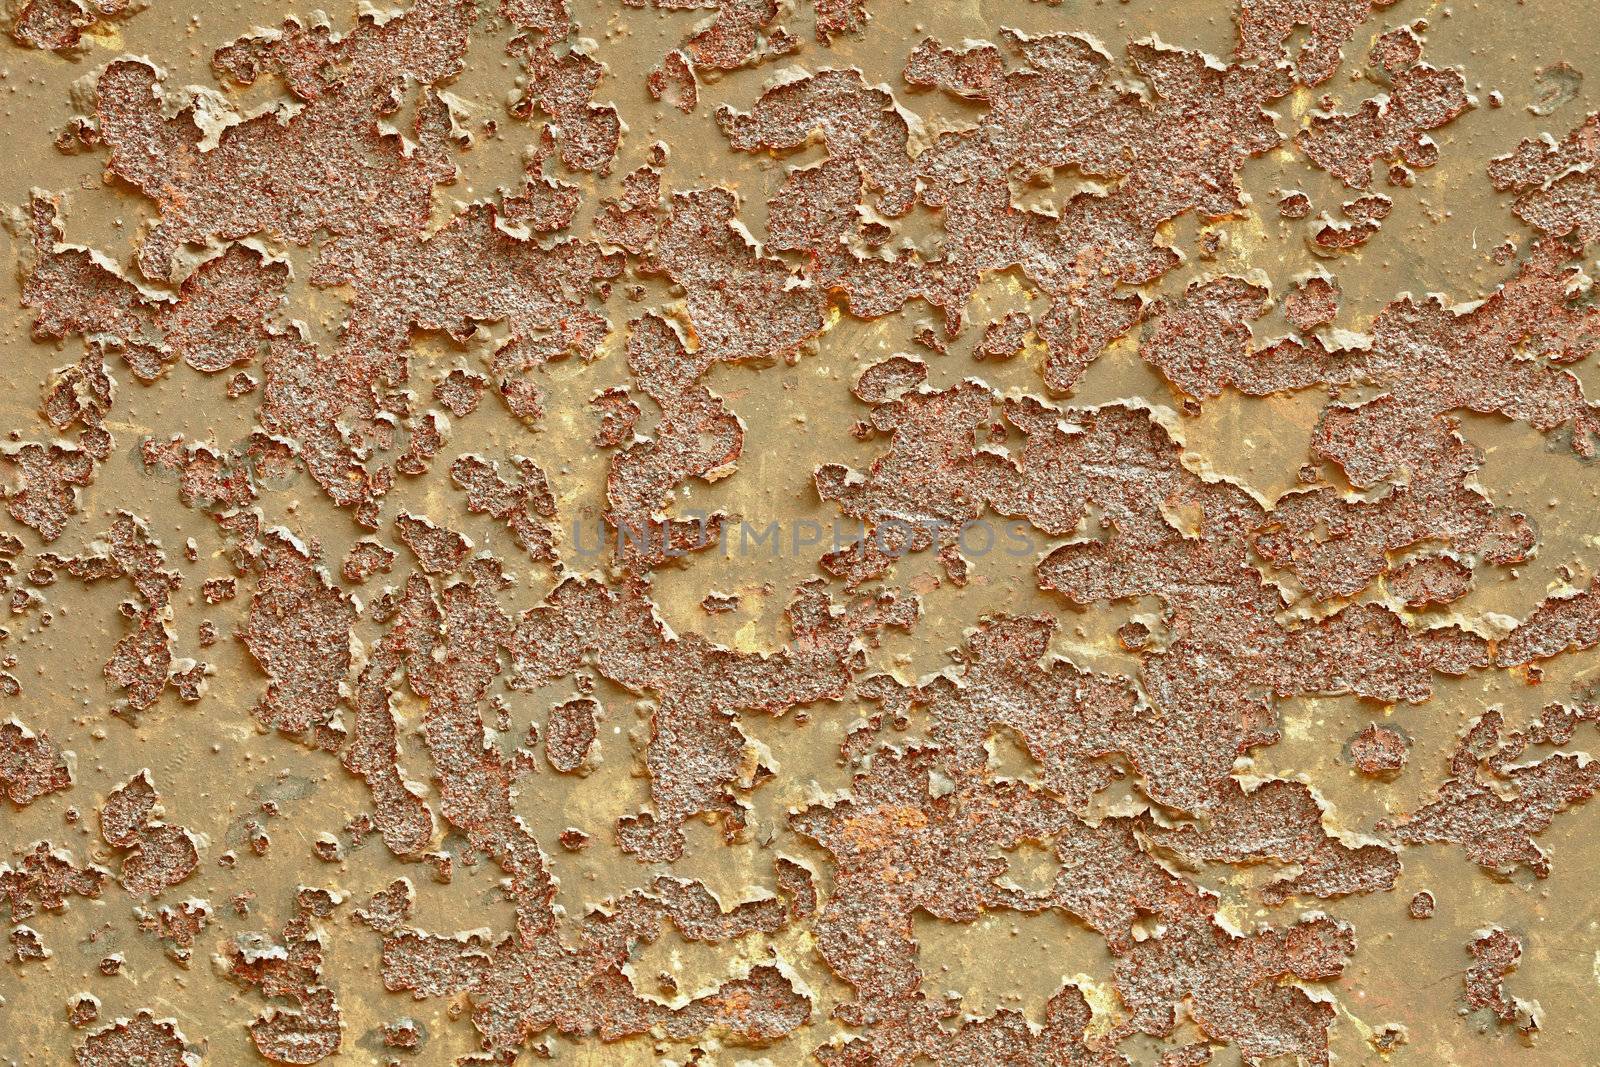 Paint on rusty surface - background by pzaxe